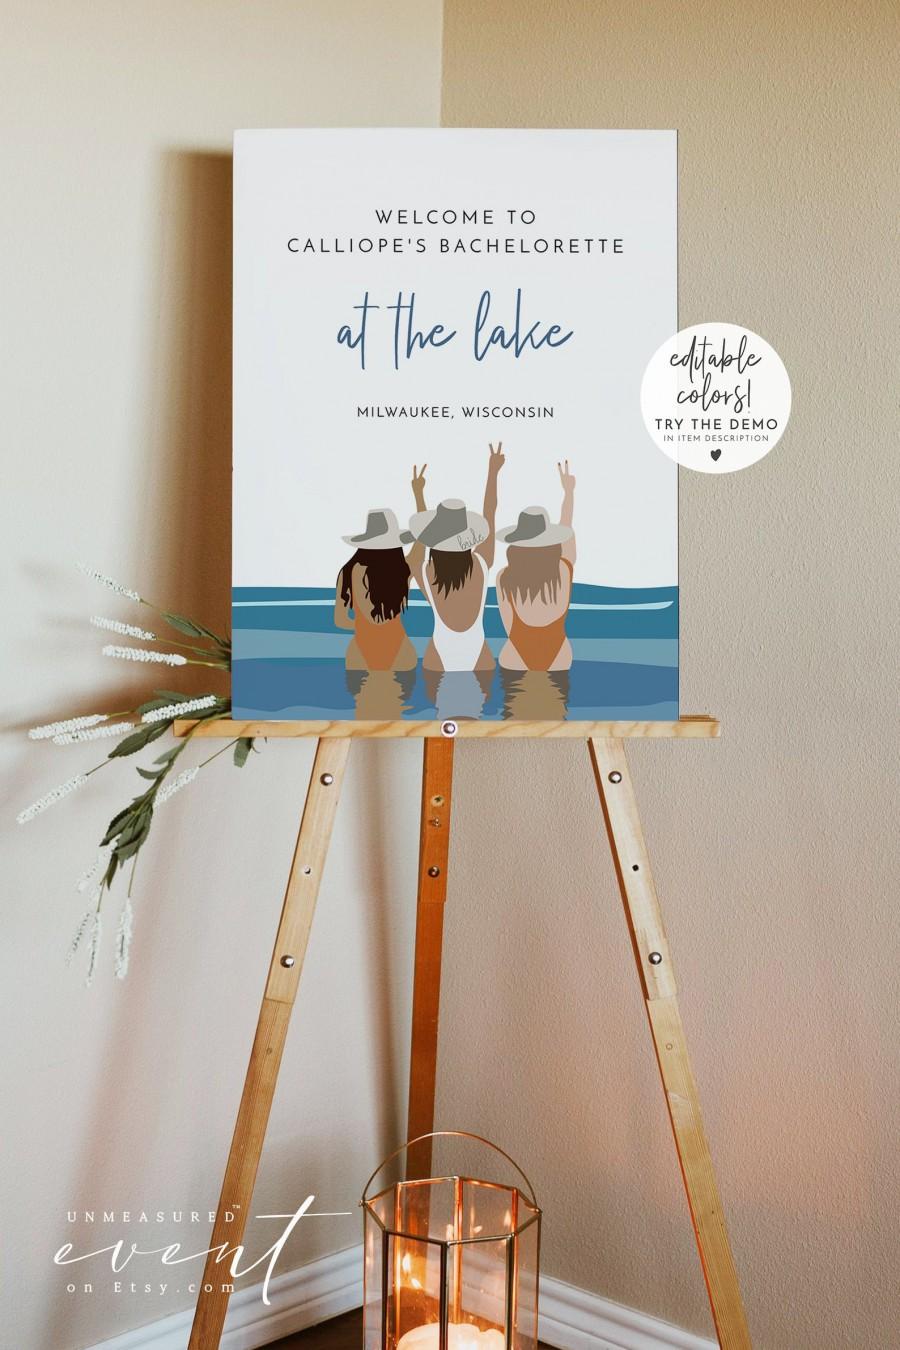 Hochzeit - REED Lake Bachelorette Welcome Sign Template, Ocean Bachelorette Sign Printable, Cabin Bachelorette Instant DIY, Swim Bachelorette Welcome